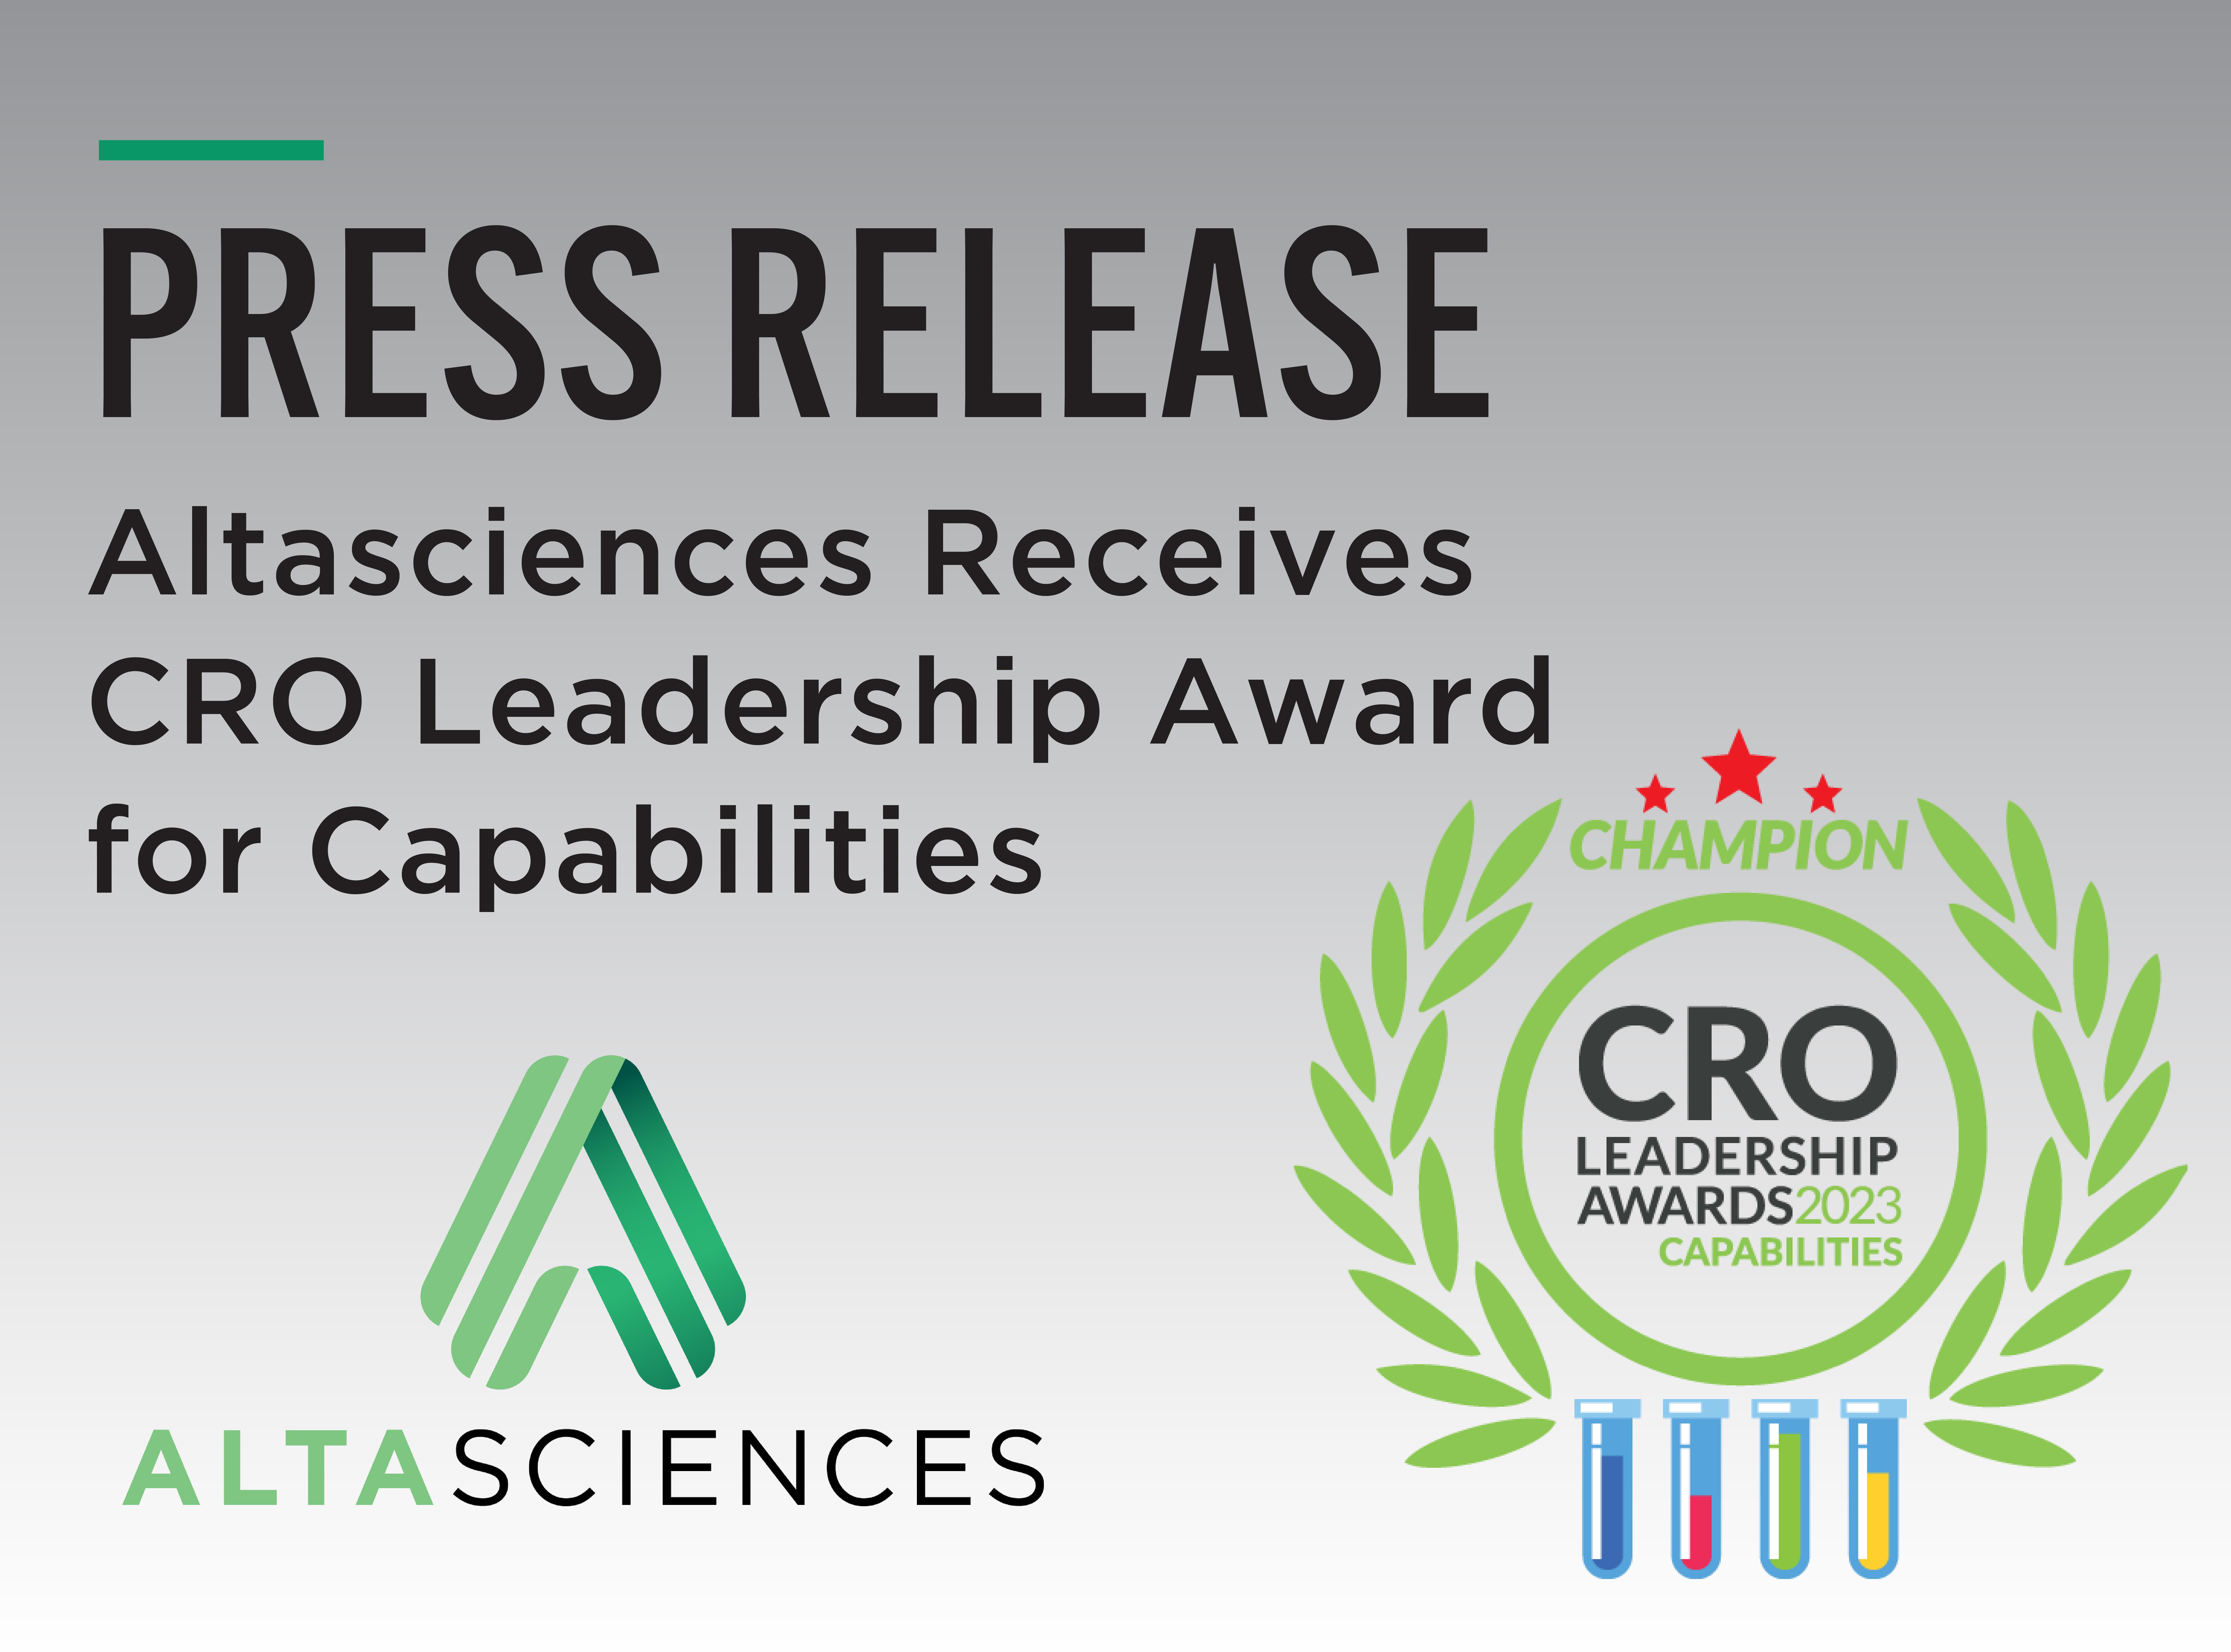 A gradient background with the Altasciences logo and a stamp for the CRO Leadership Award for Capabilities